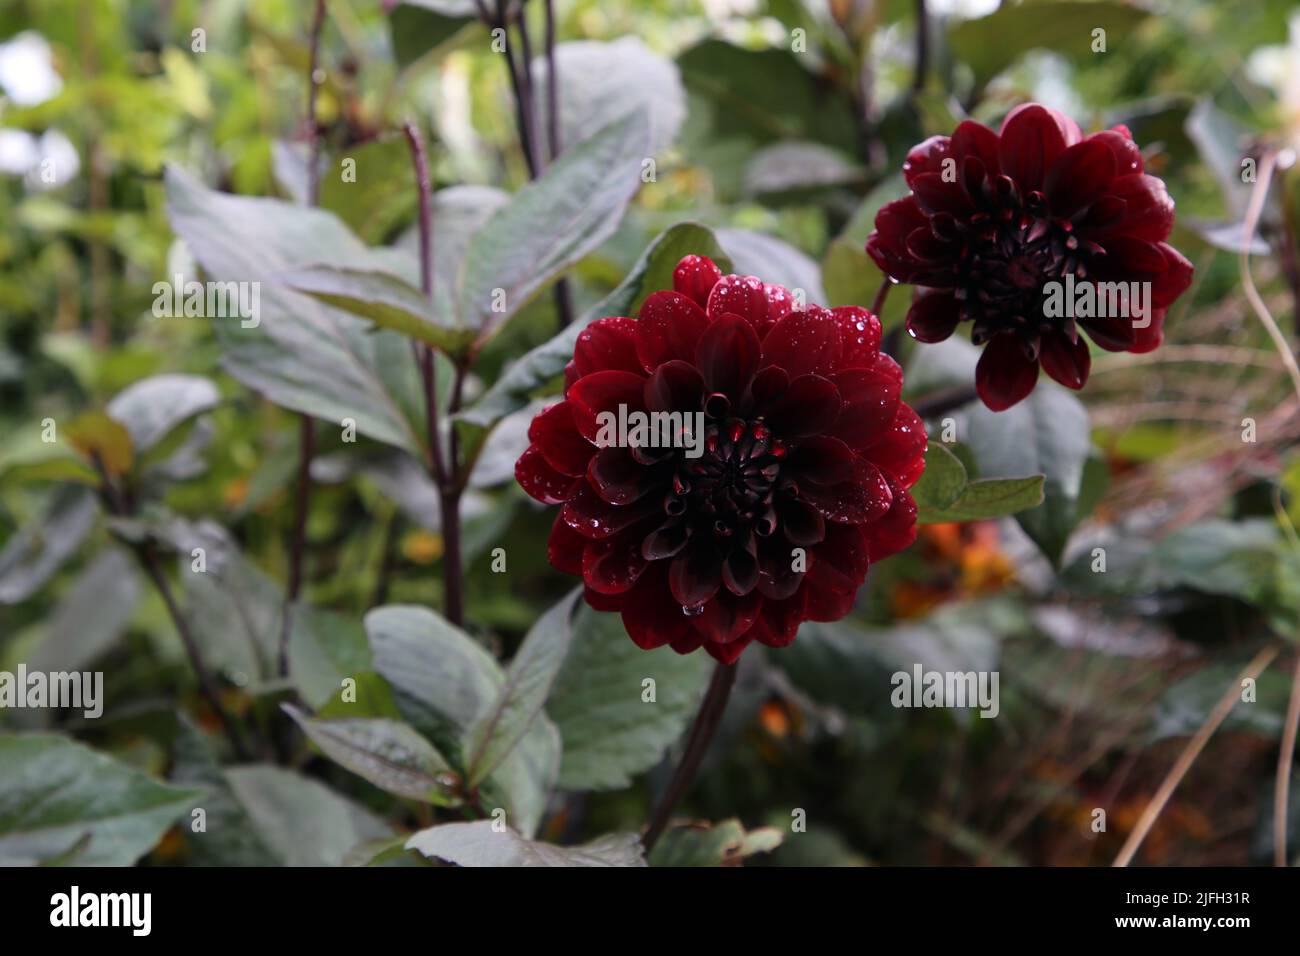 Red chrysanthemum aka Dahlia flowers with green leaves photographed in a garden in Helsinki, Finland during a sunny fall day. Closeup color image. Stock Photo